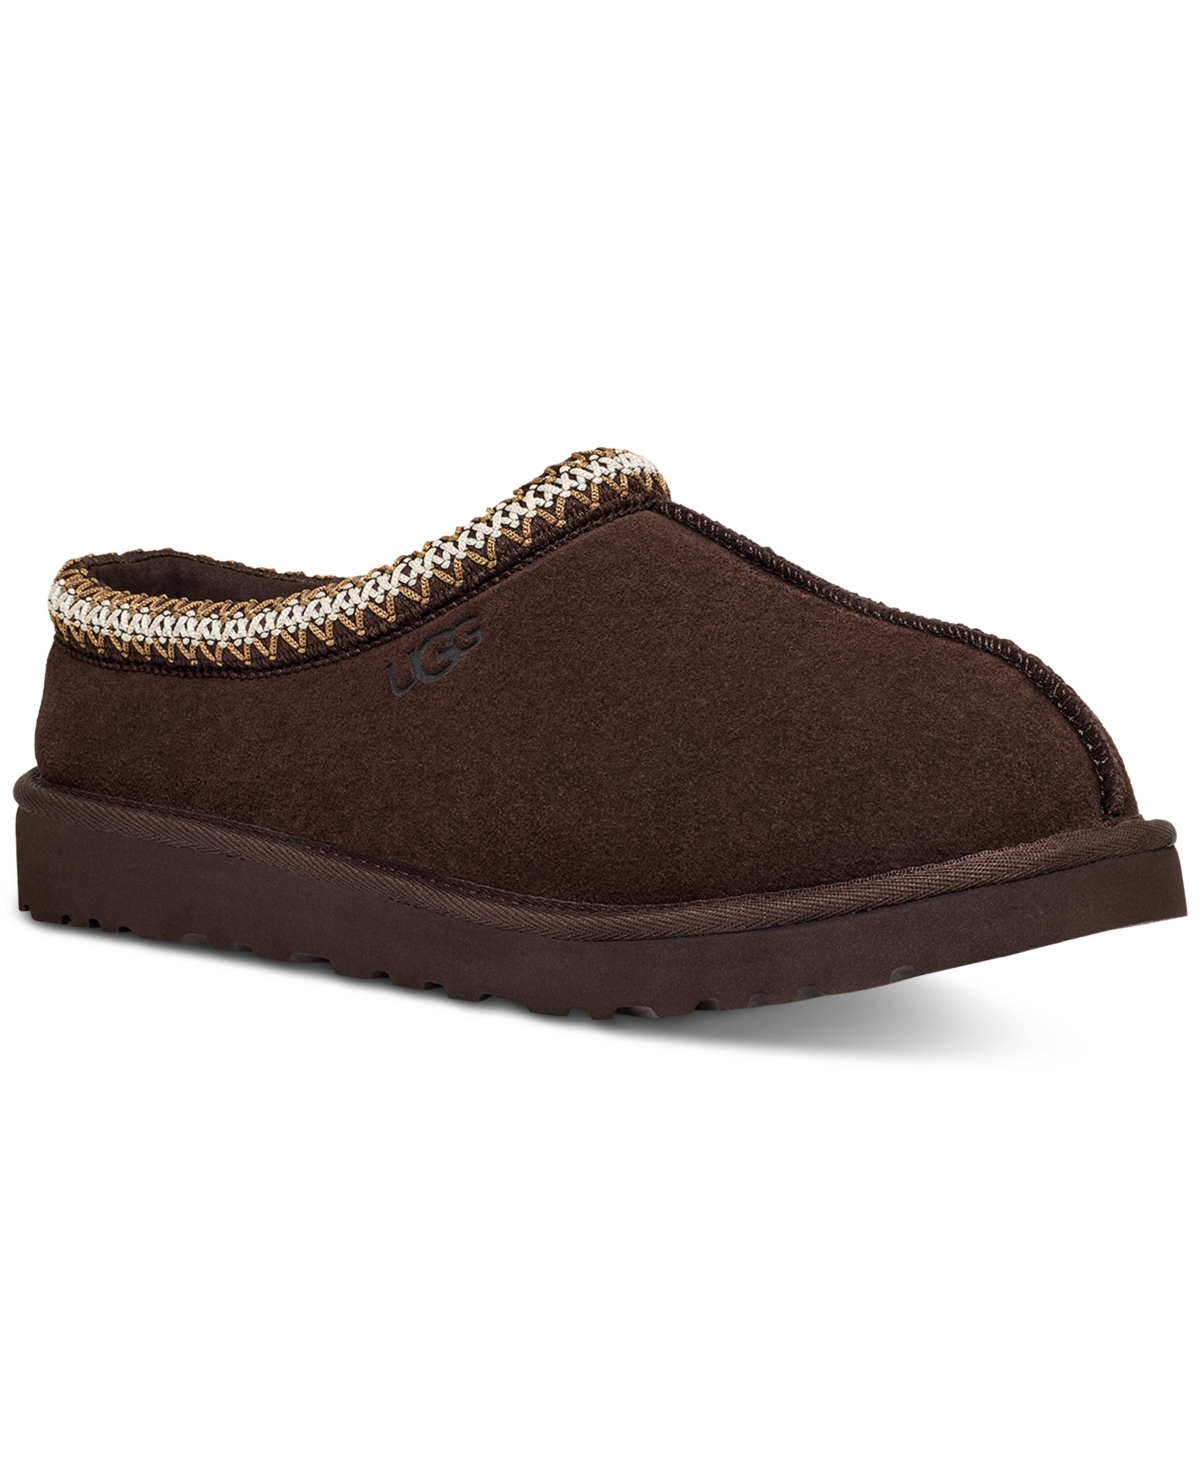 Ugg Men's Tasman Clog Slippers In Dusted Cocoa